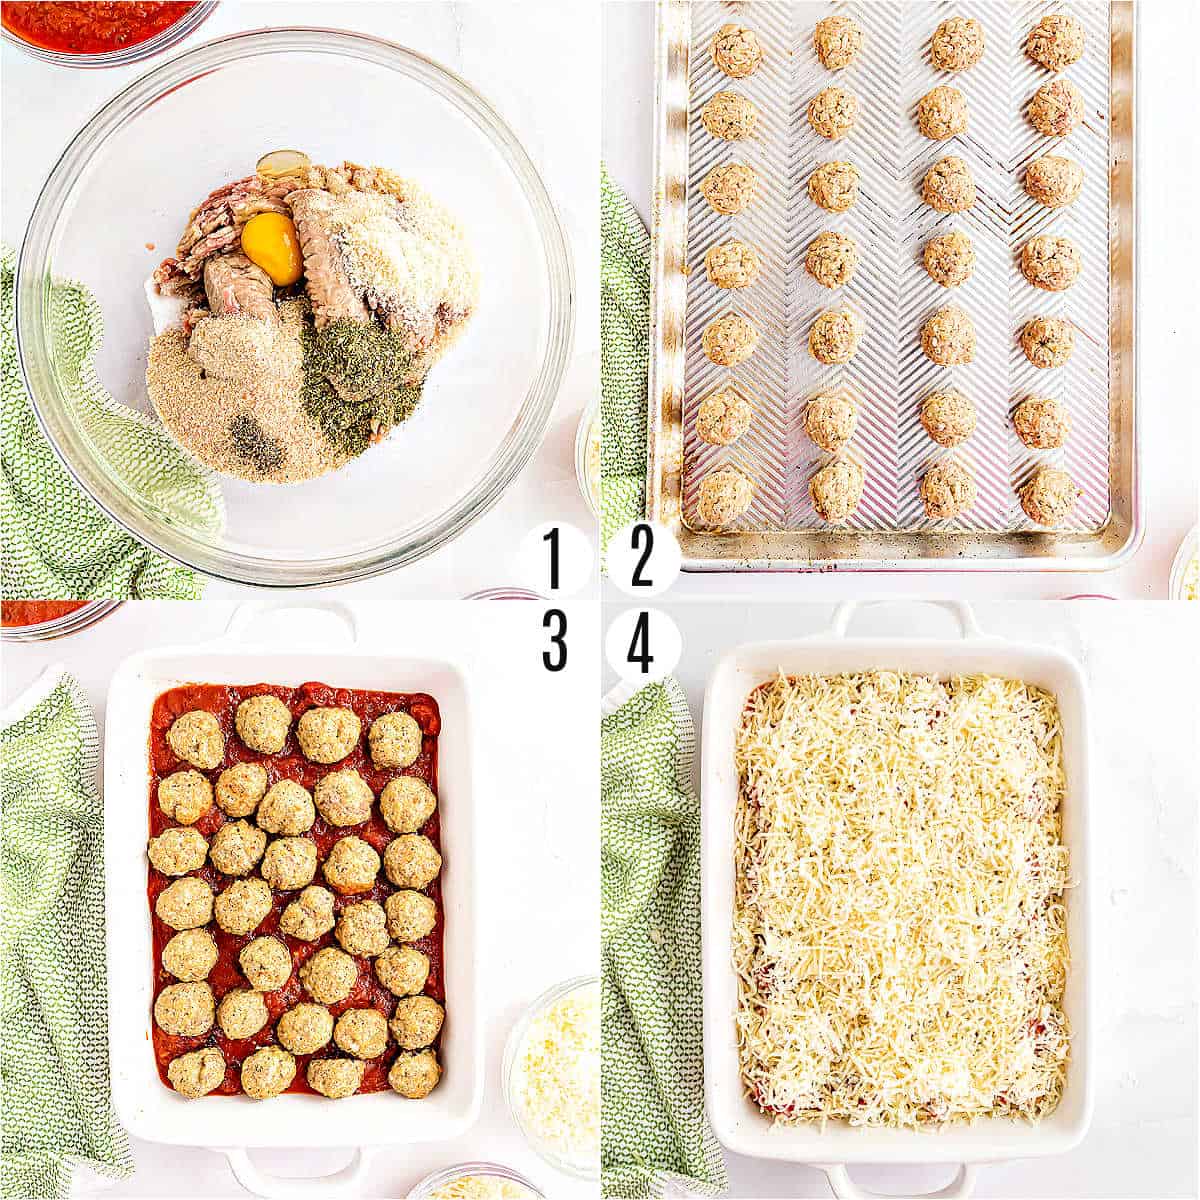 Step by step photos showing how to make meatball casserole.